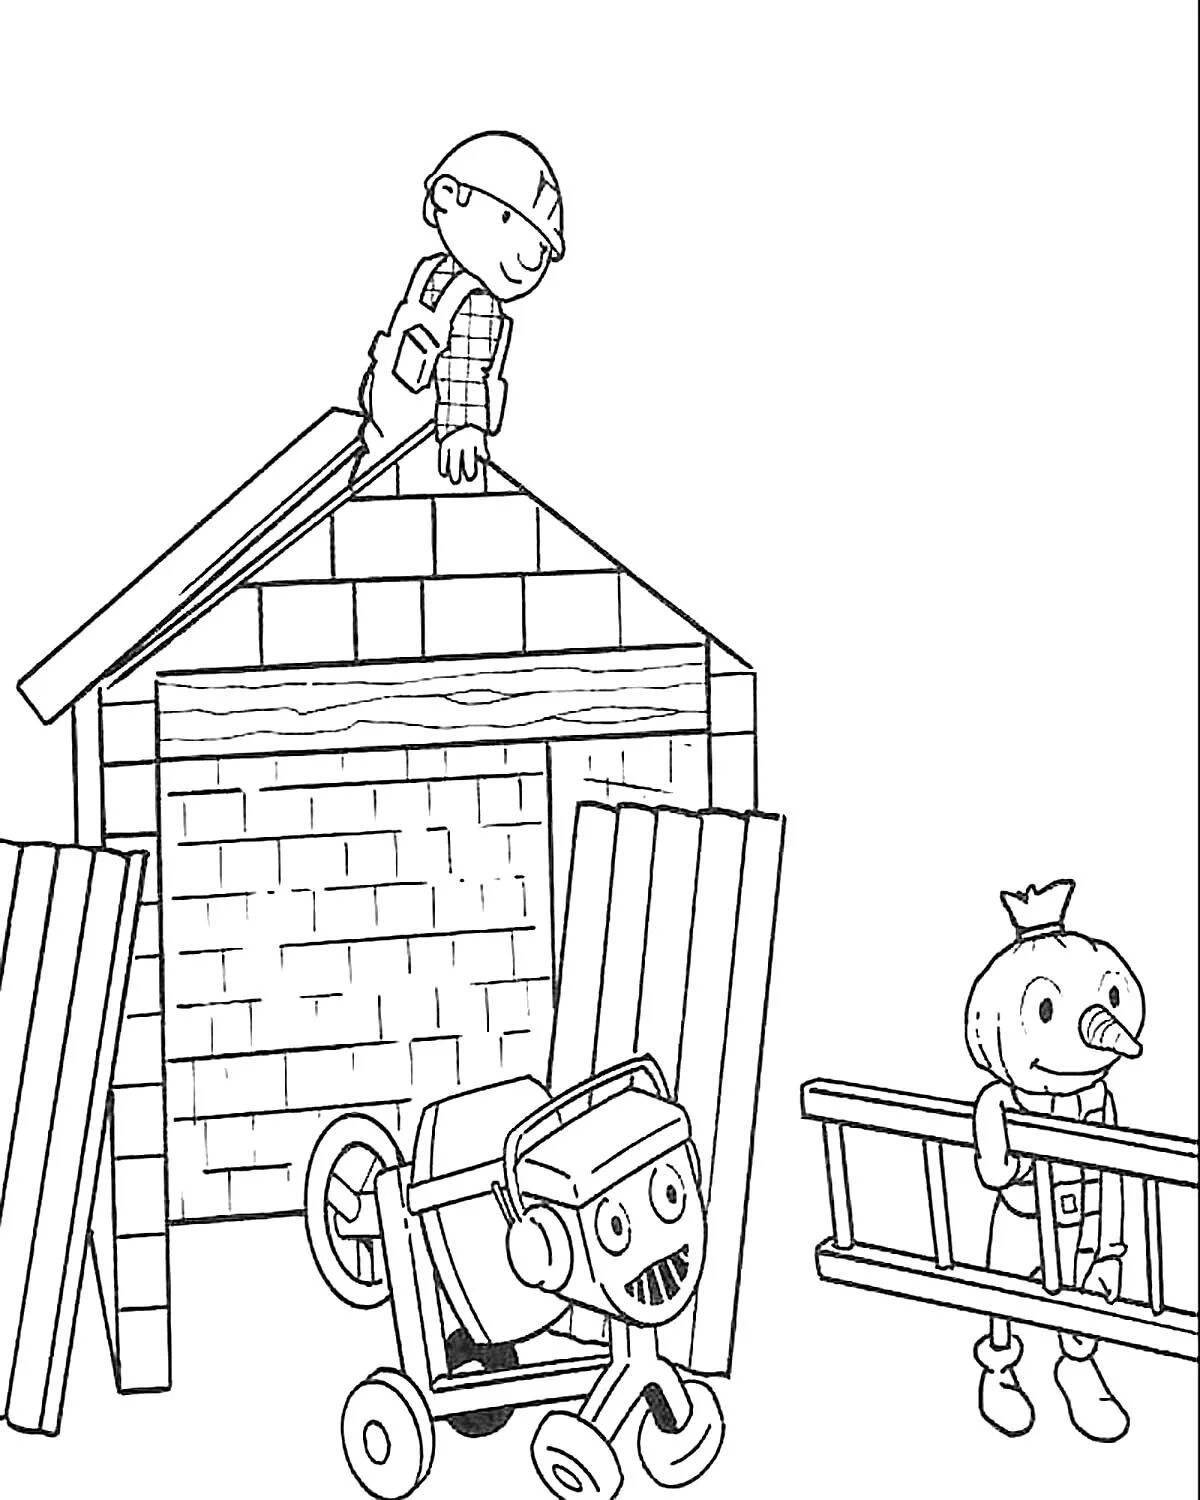 Colorful house building coloring page